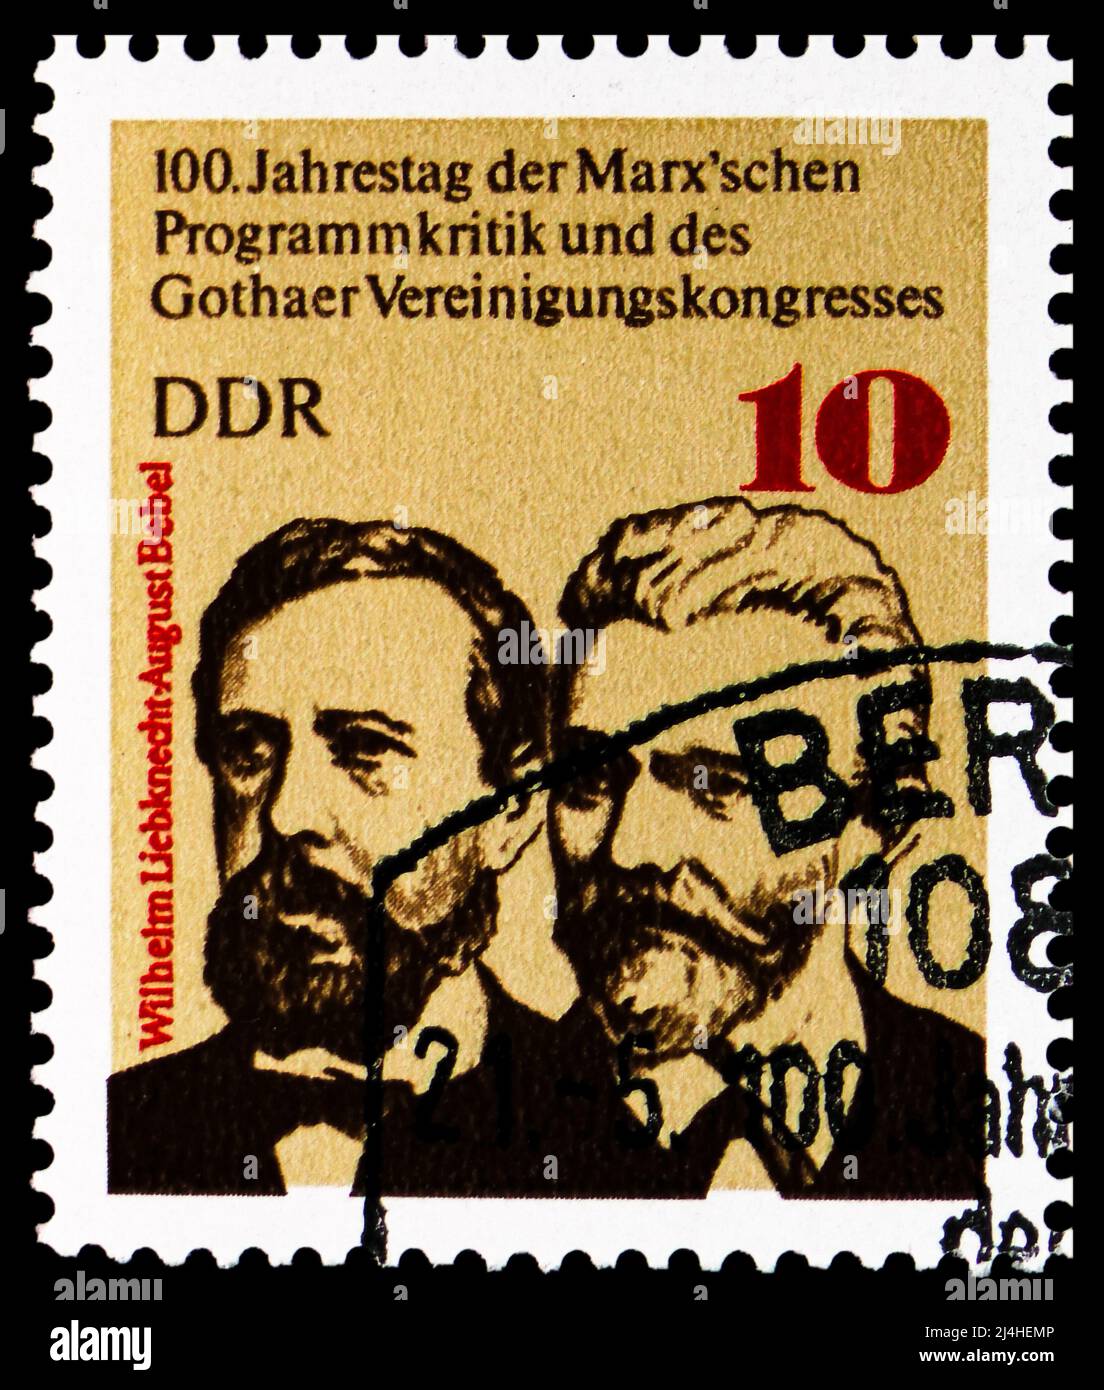 MOSCOW, RUSSIA - MARCH 27, 2022: Postage stamp printed in Germany shows Wilhelm Liebknecht and August Bebel, Marxschen Program Criticism serie, circa Stock Photo